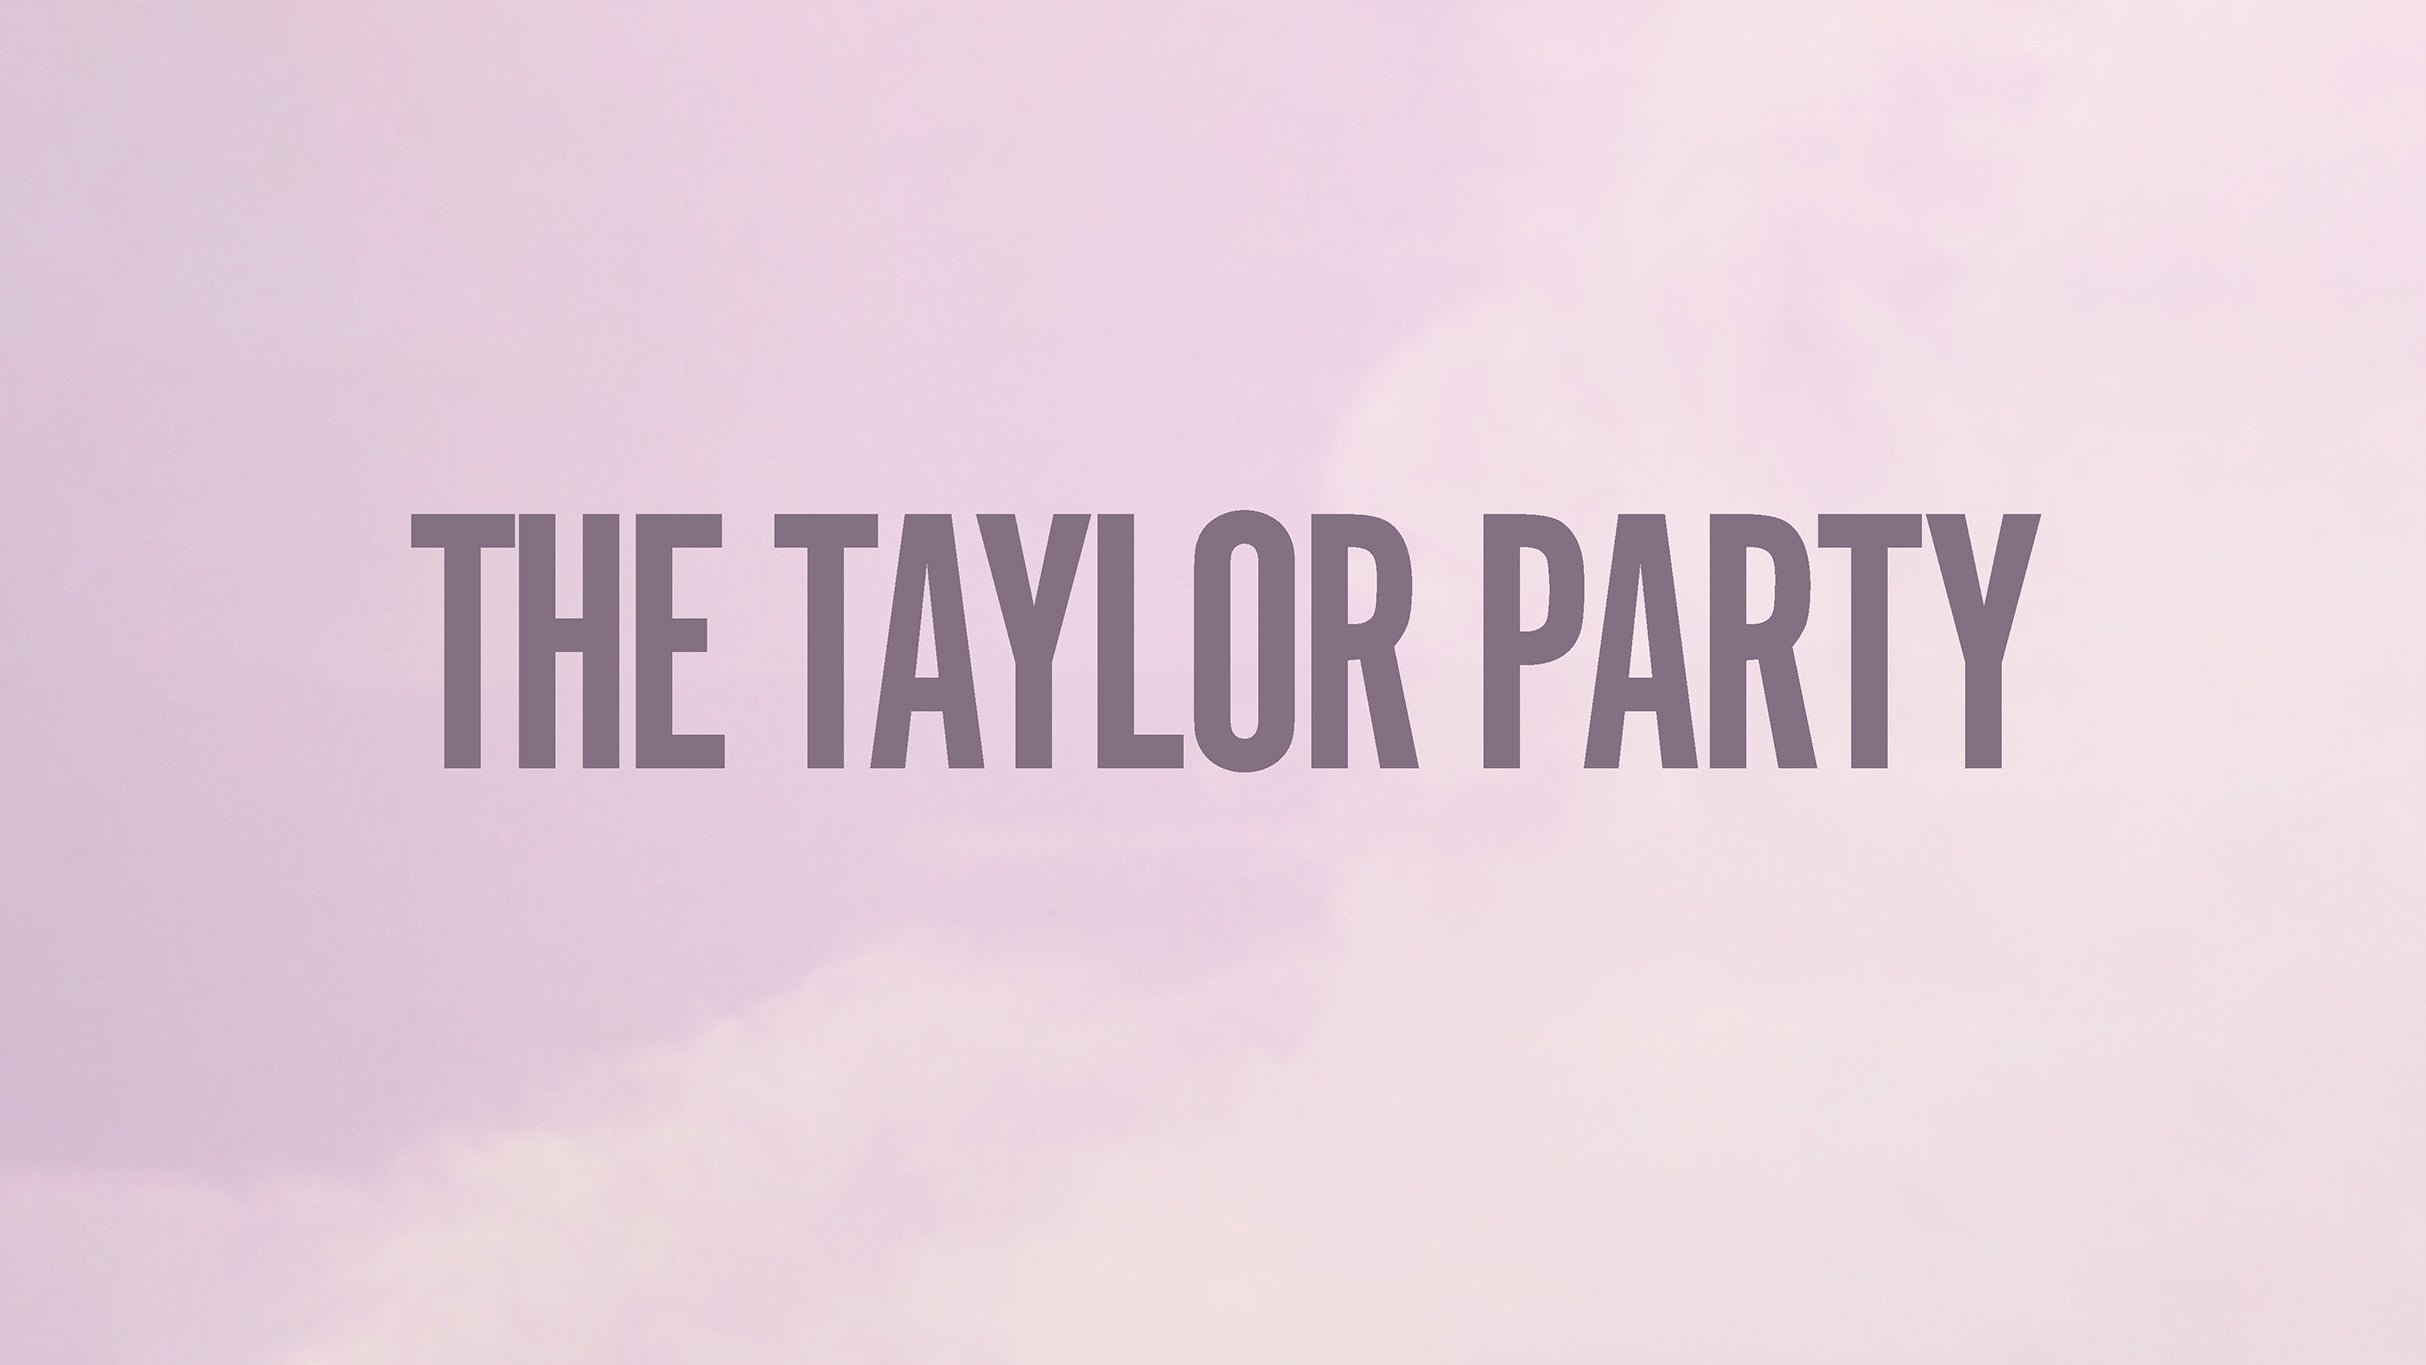 The Taylor Party: The TS Dance Party - (18+) presale password for approved tickets in Minneapolis